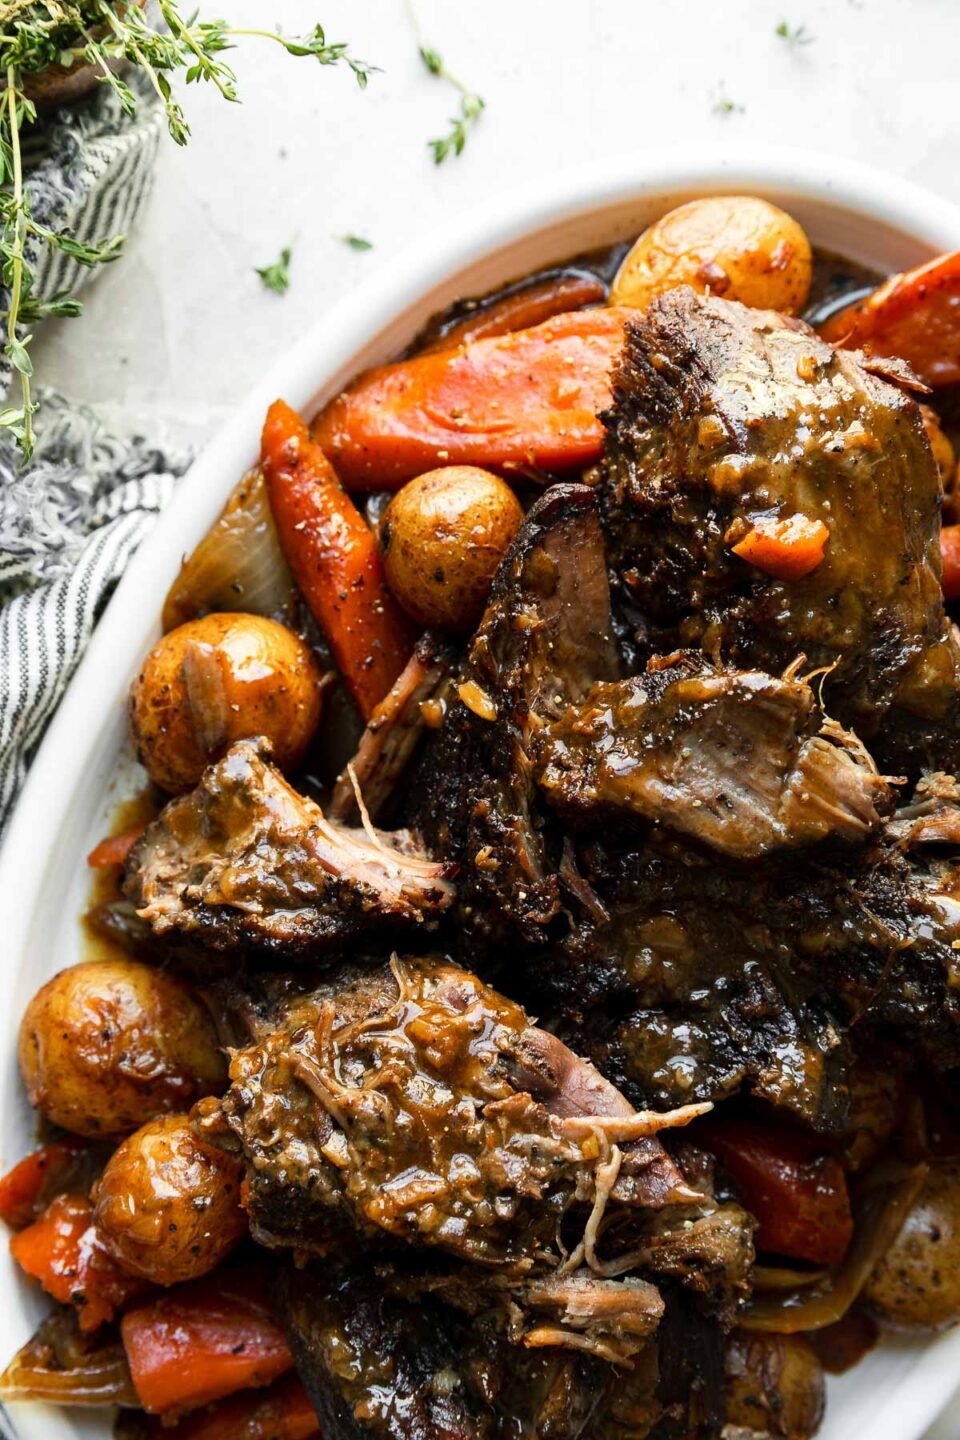 A close up of braised pot roast with vegetables are plated for serving atop a white platter. The platter sits atop a creamy white textured surface with a blue and white striped linen napkin and a small wooden pinch bowl filled with fresh thyme surrounding the platter.